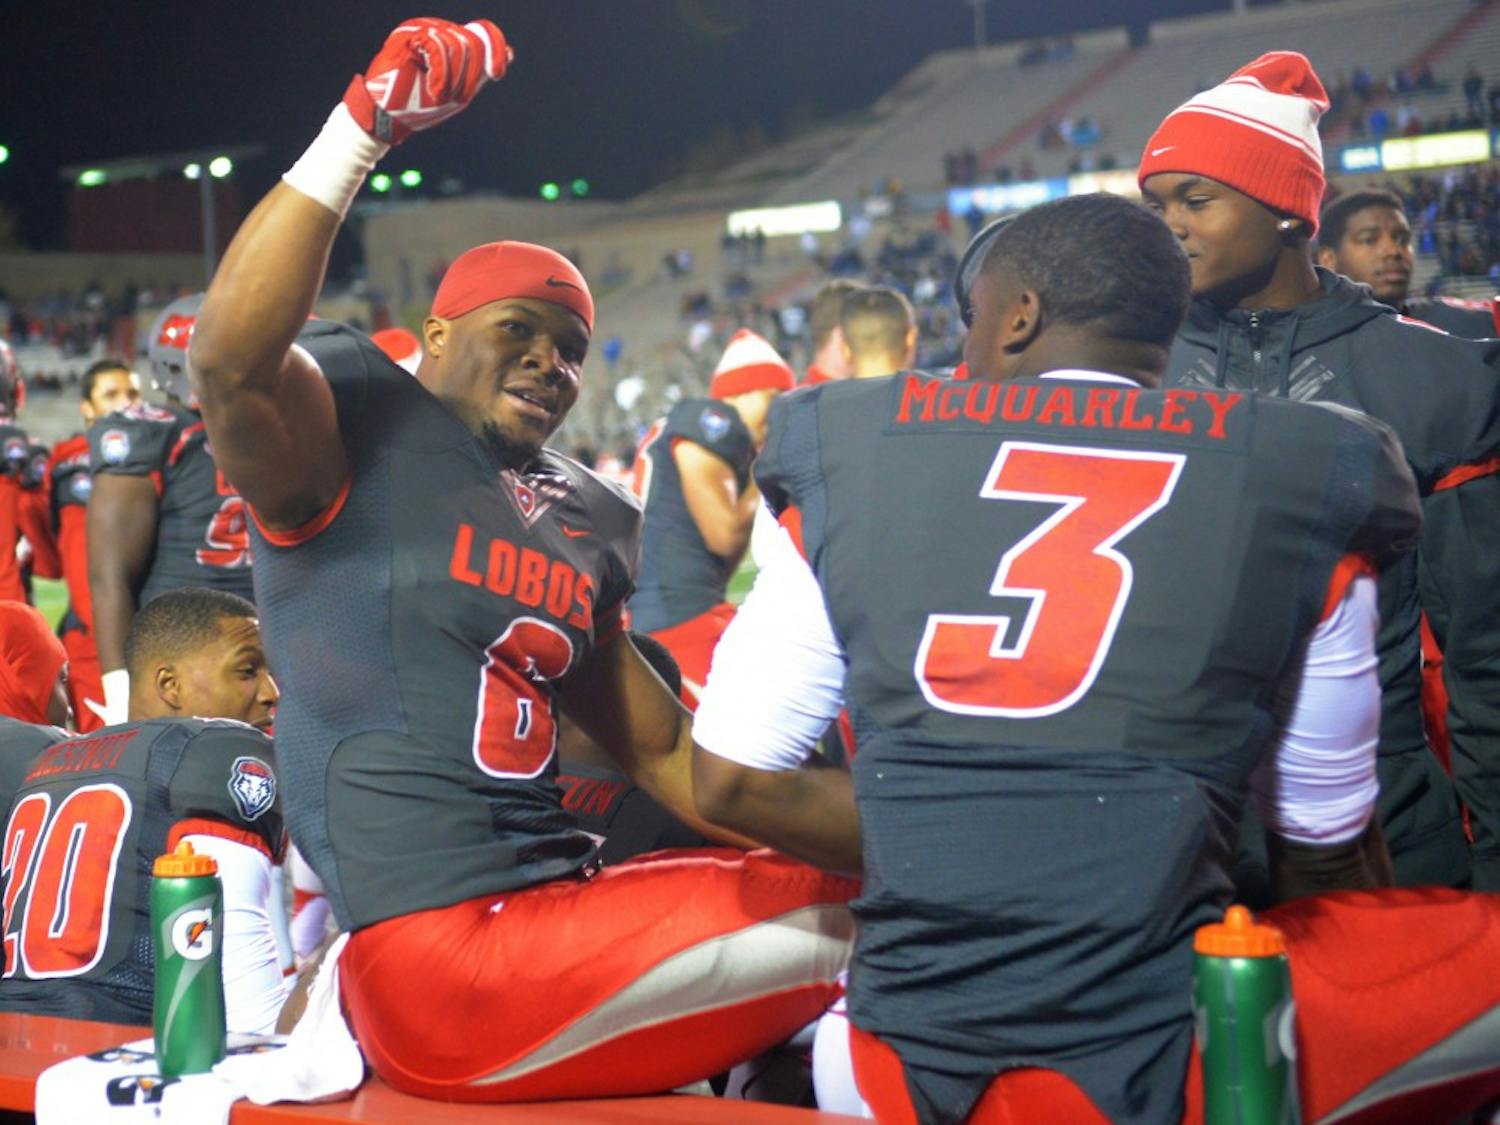 Redshirt senior running back Jhurell Pressley raises his hand to cheering fans after a 75 yard scoring run at University Stadium Saturday night. Pressley scored three touchdowns with 170 yards rushed to help aid the Lobos 47-35 victory over Air Force.